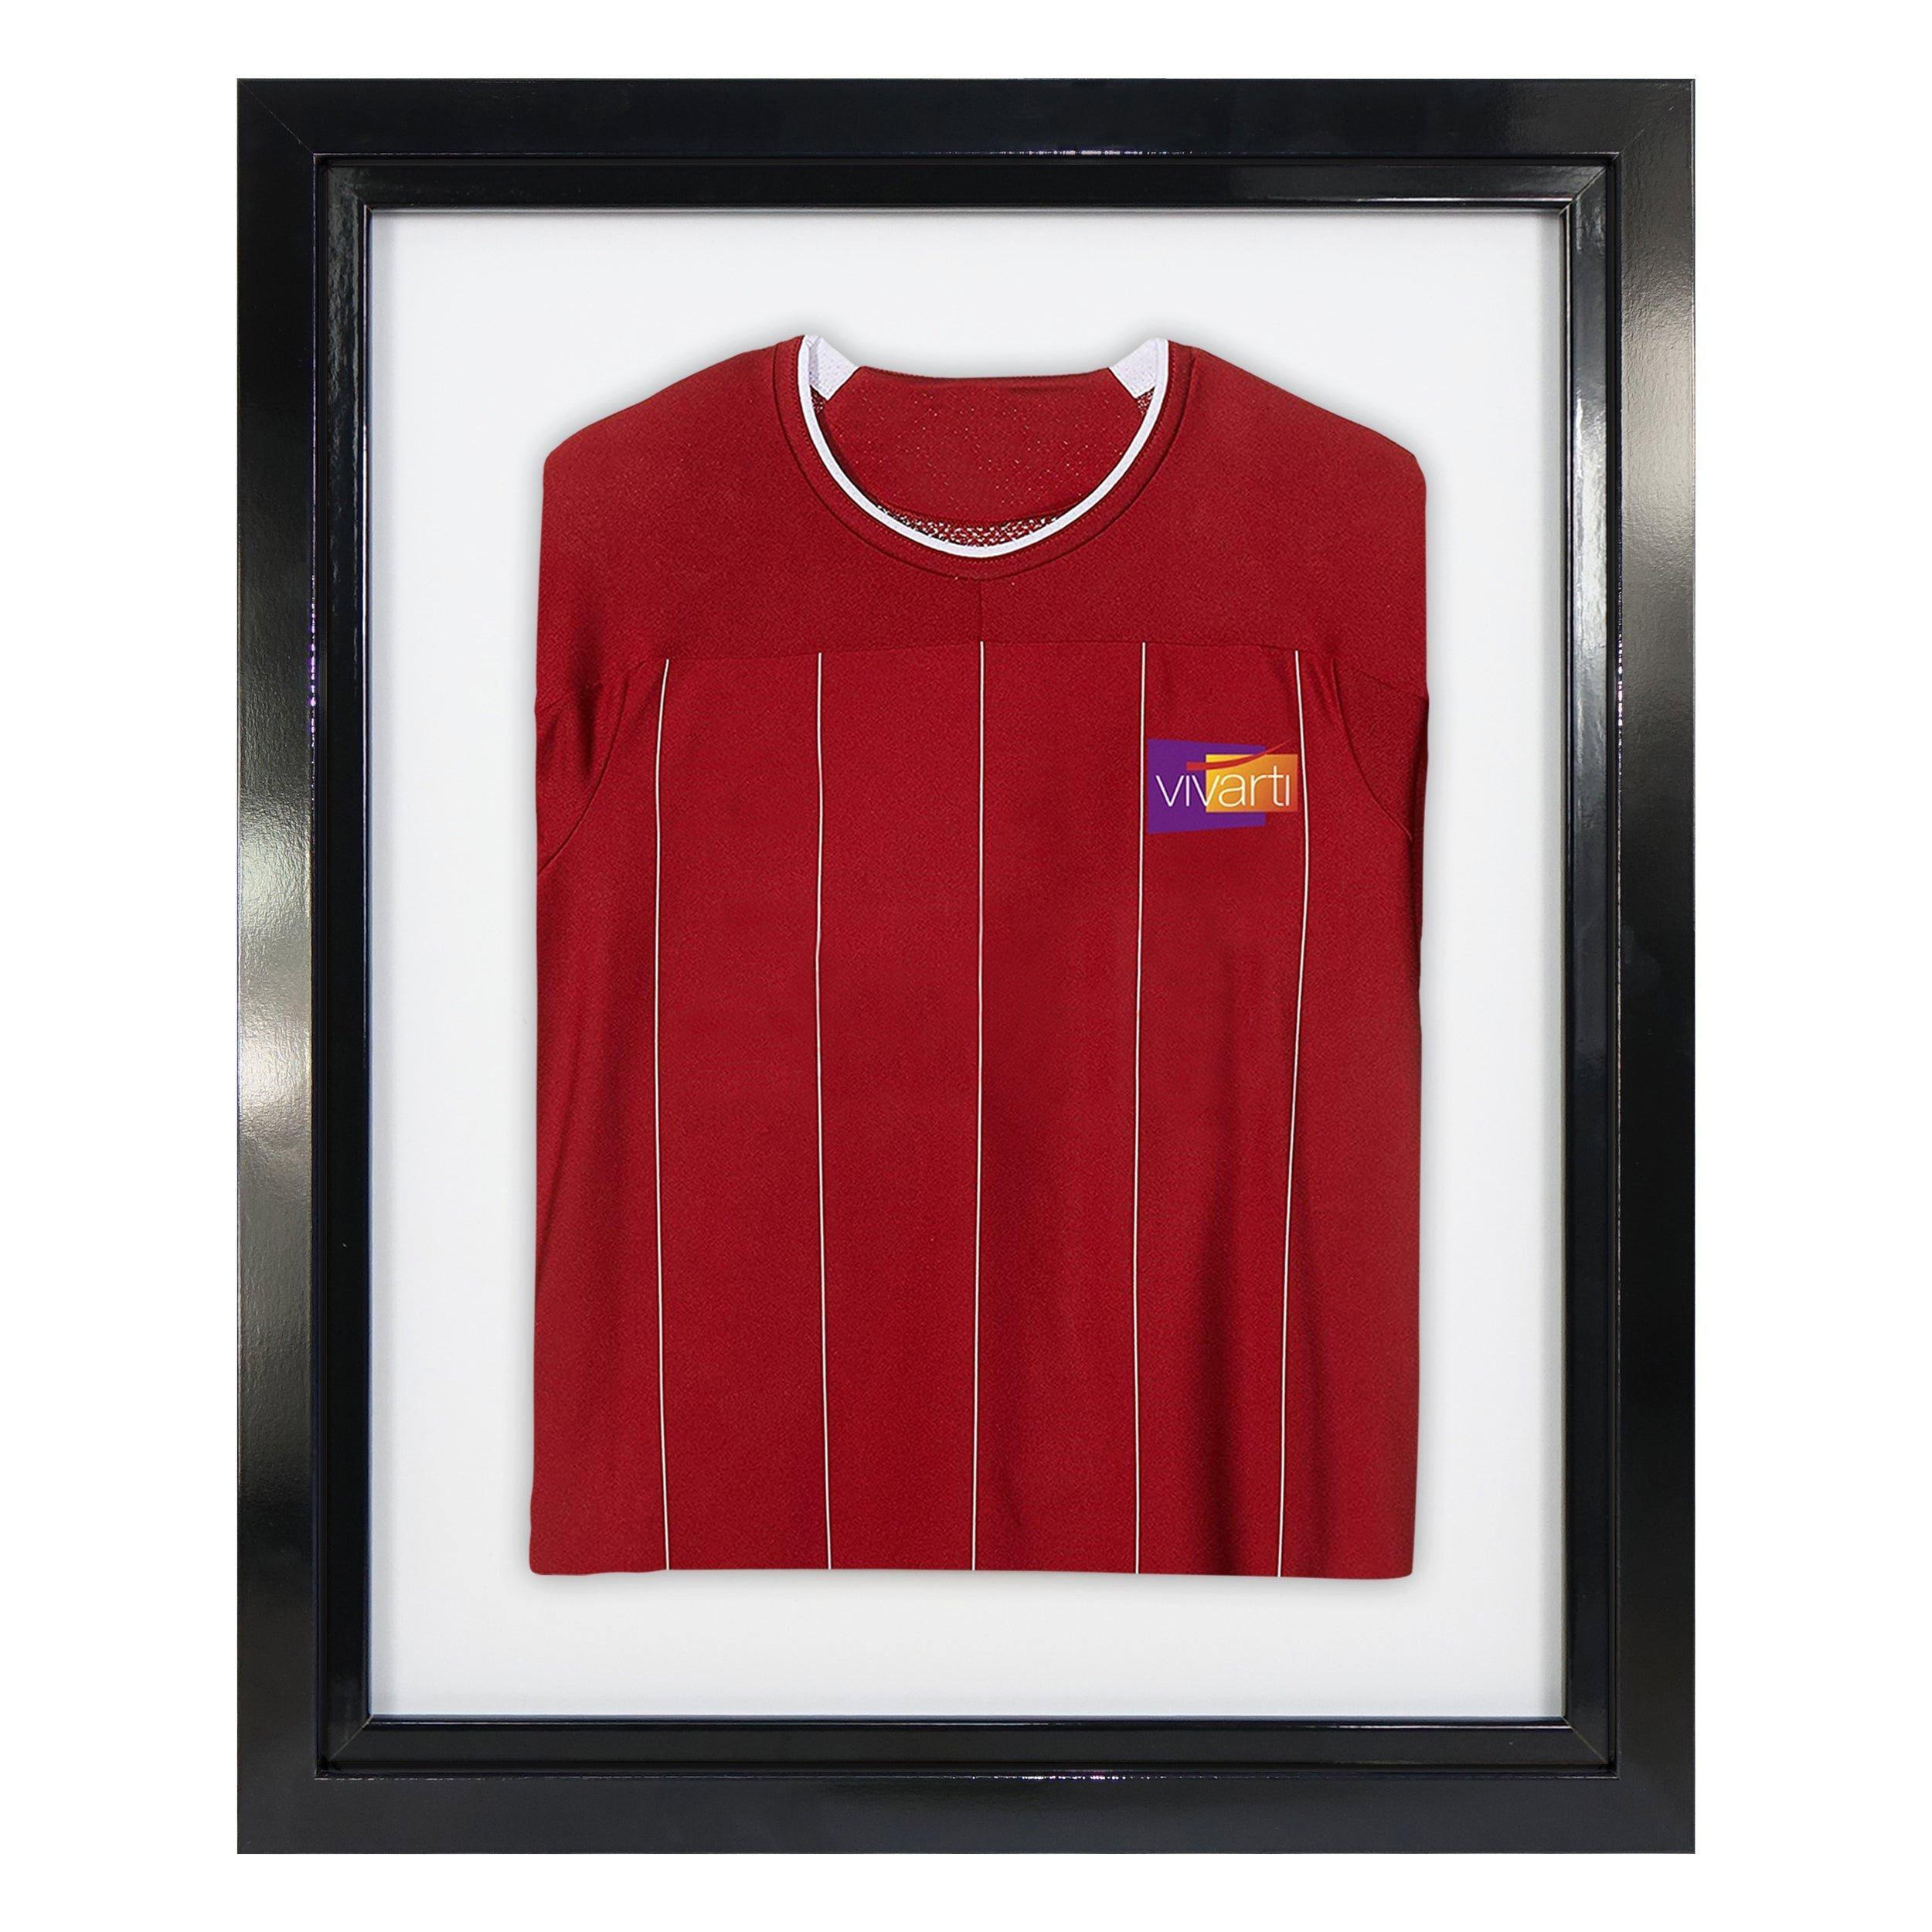 Standard Mounted Sports Shirt Display Frame with Gloss Black Frame and Black Inner Frame 40 x 50cm - image 1